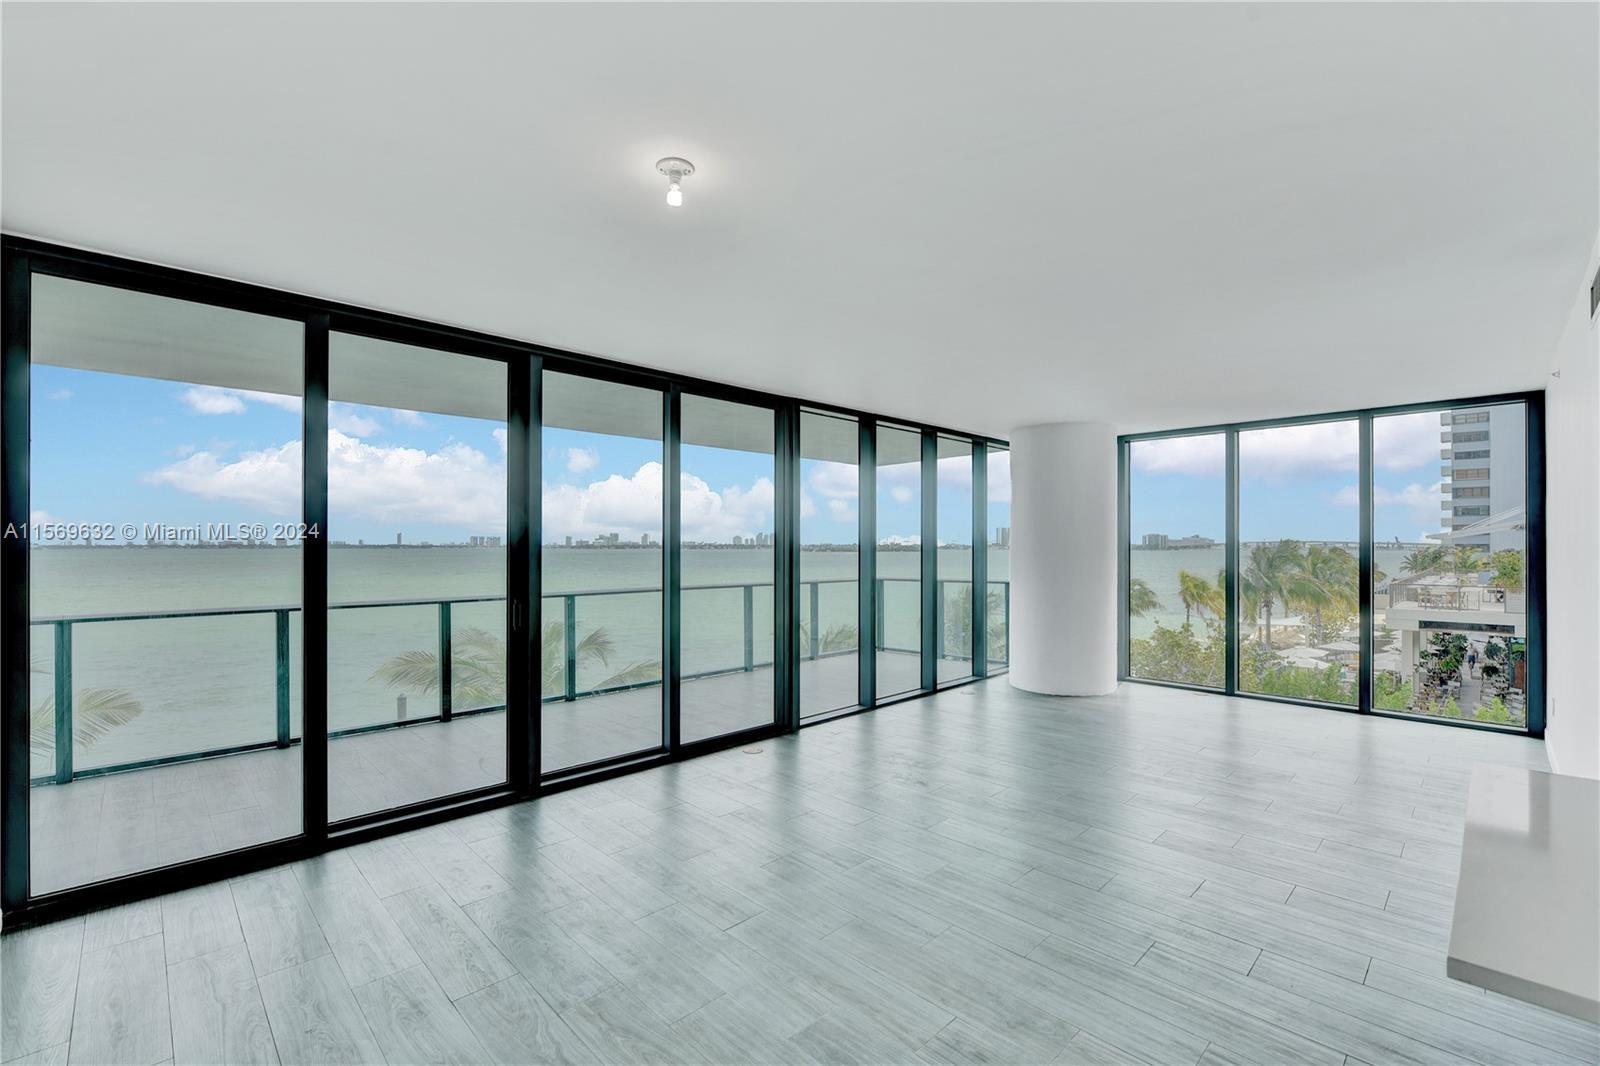 This 3 bdrm 3.5 bath corner unit condo has a multi-million dollar, unobstructed view of the Biscayne